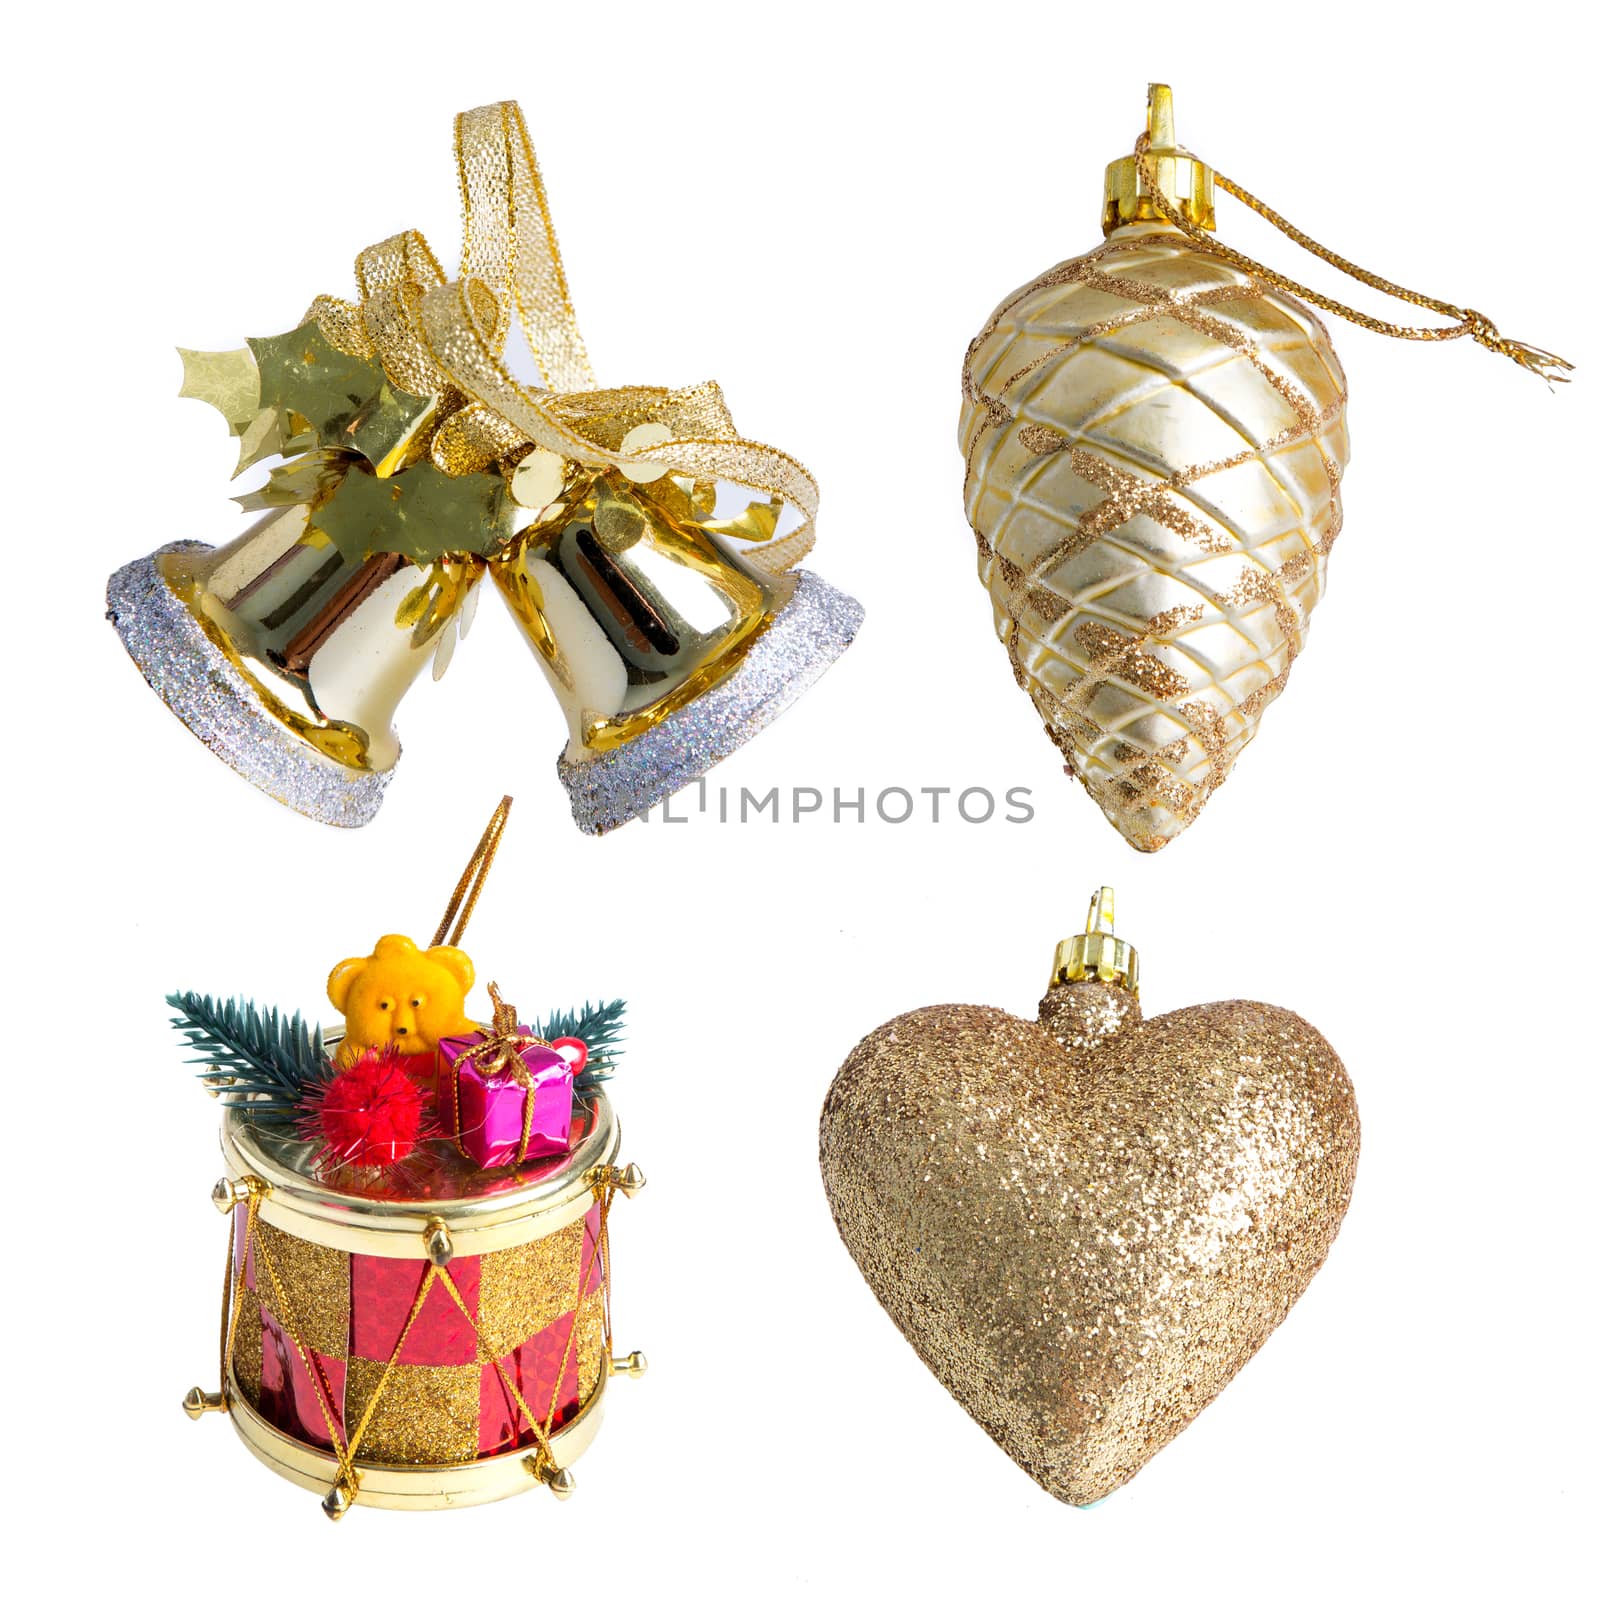 Christmas ornament, isolated on white background